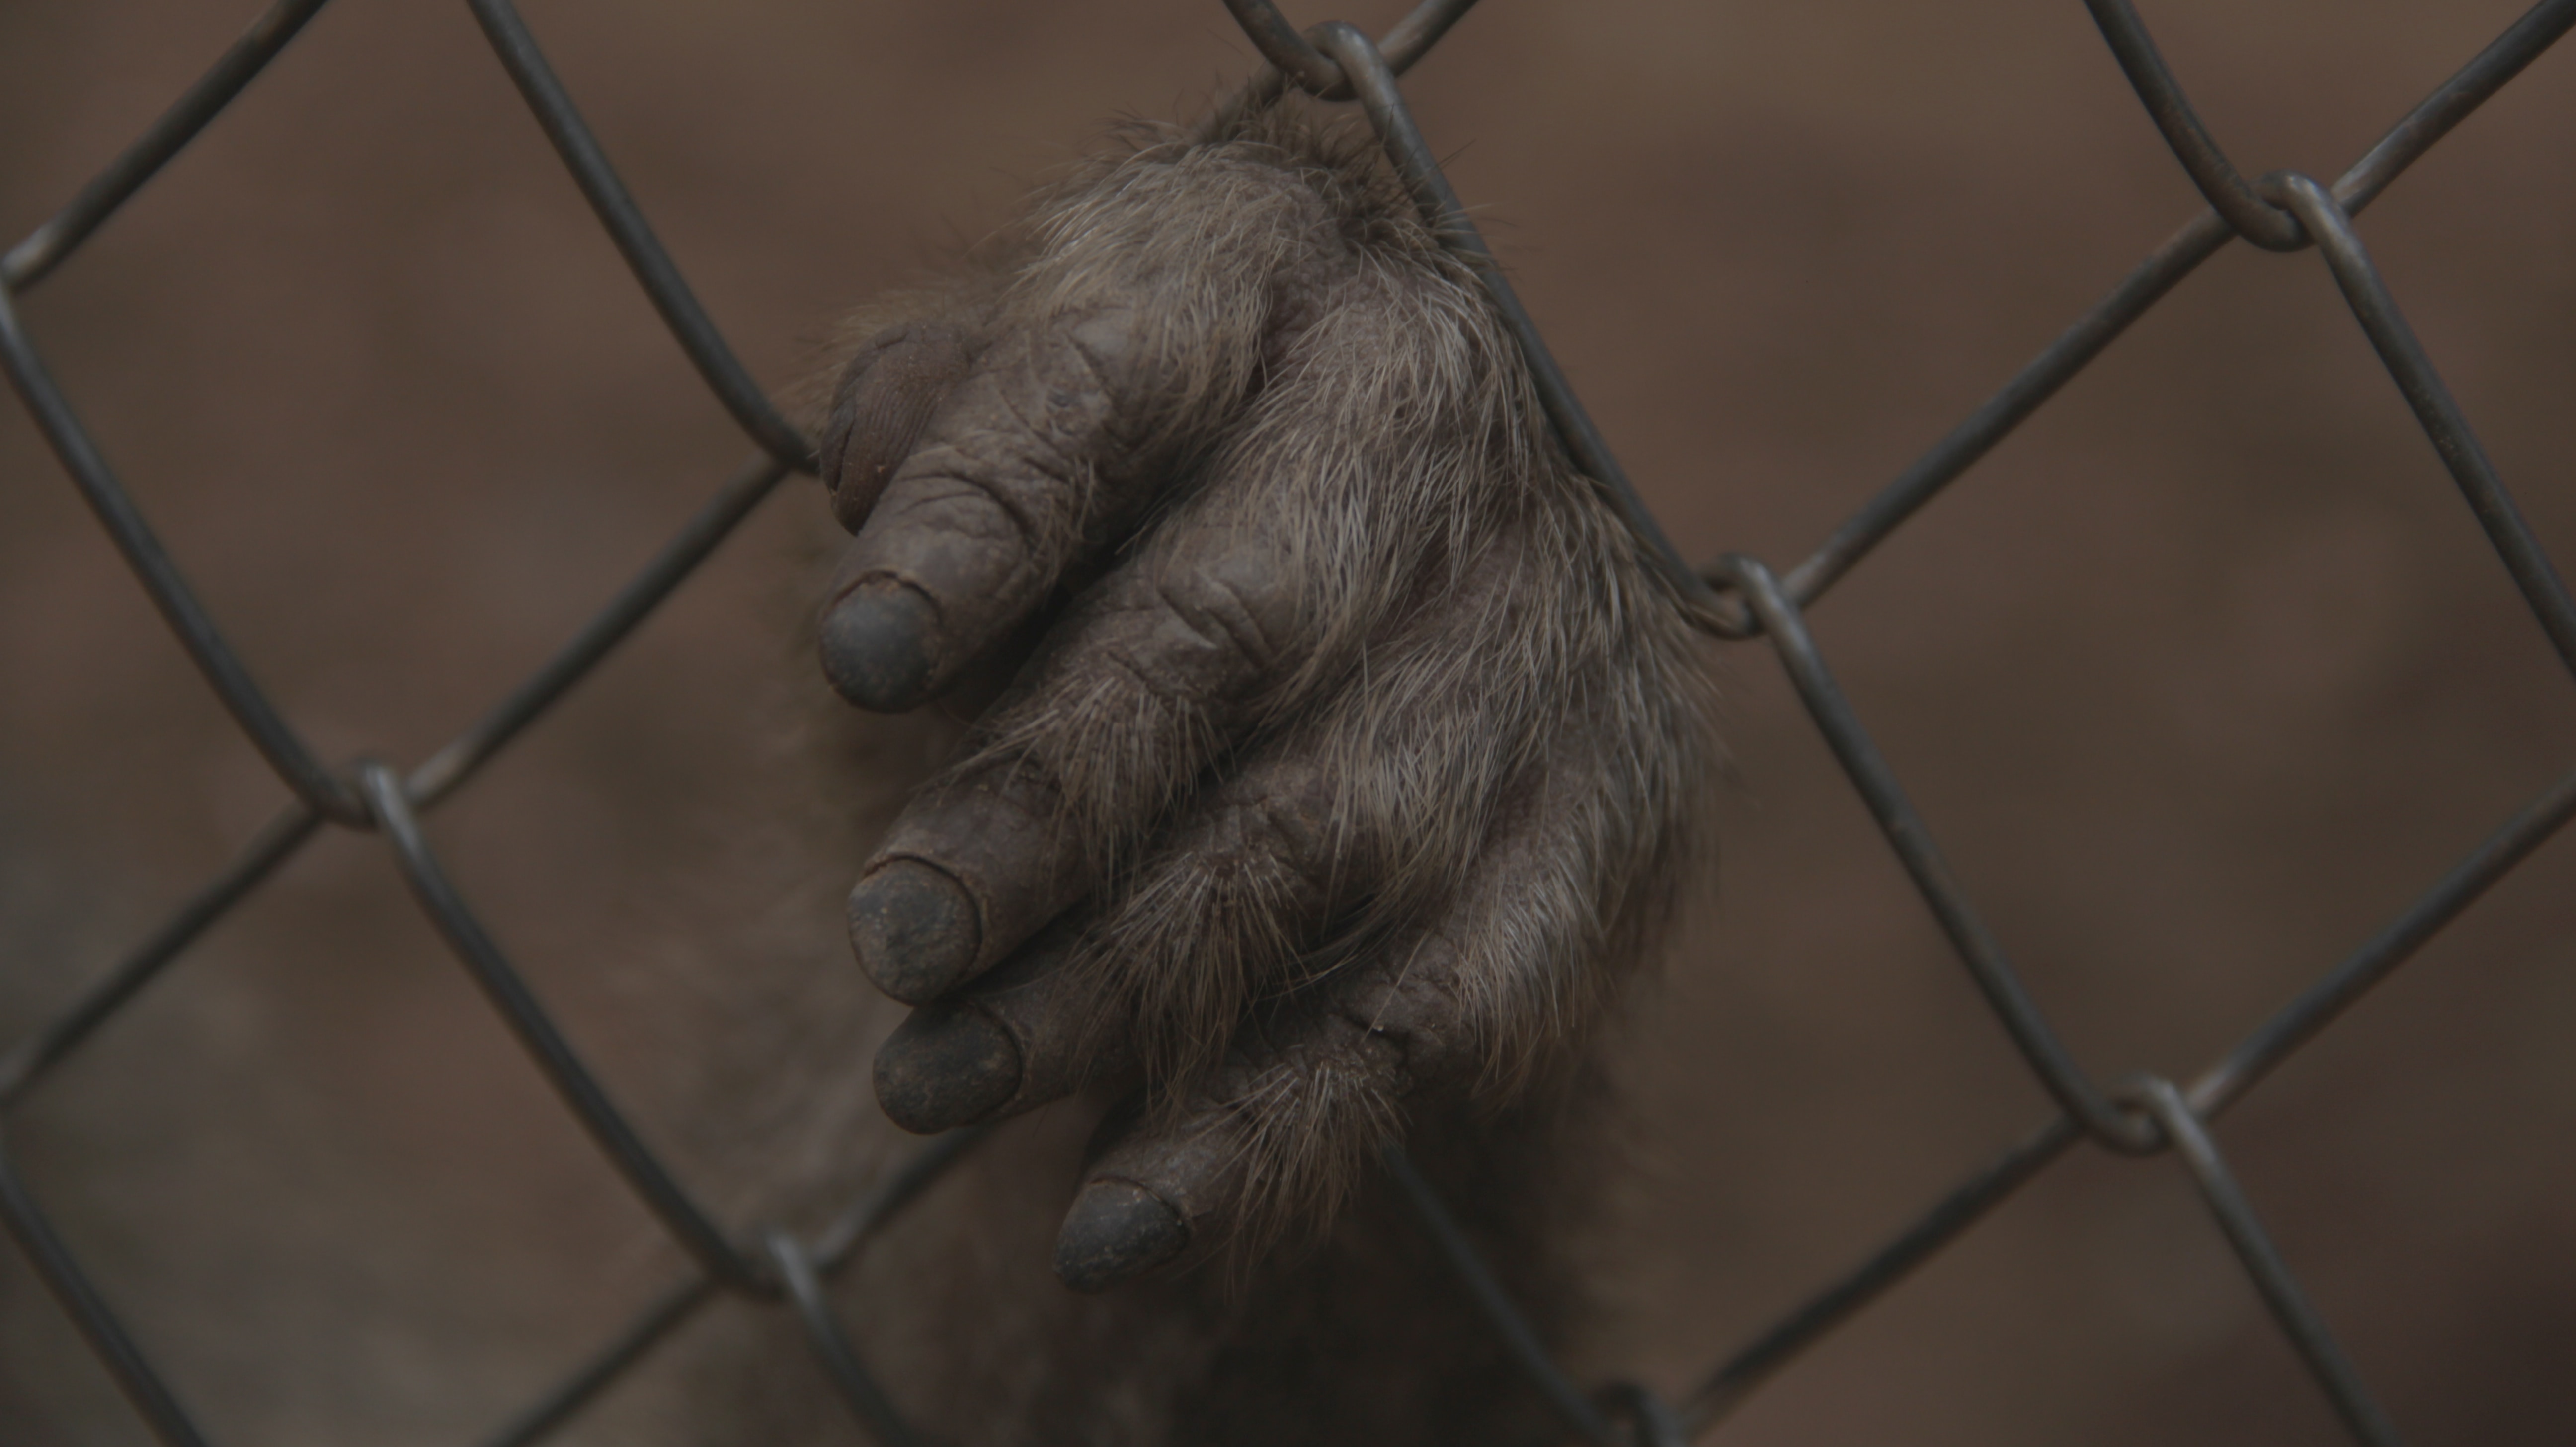 Ape hand holding a wire cage